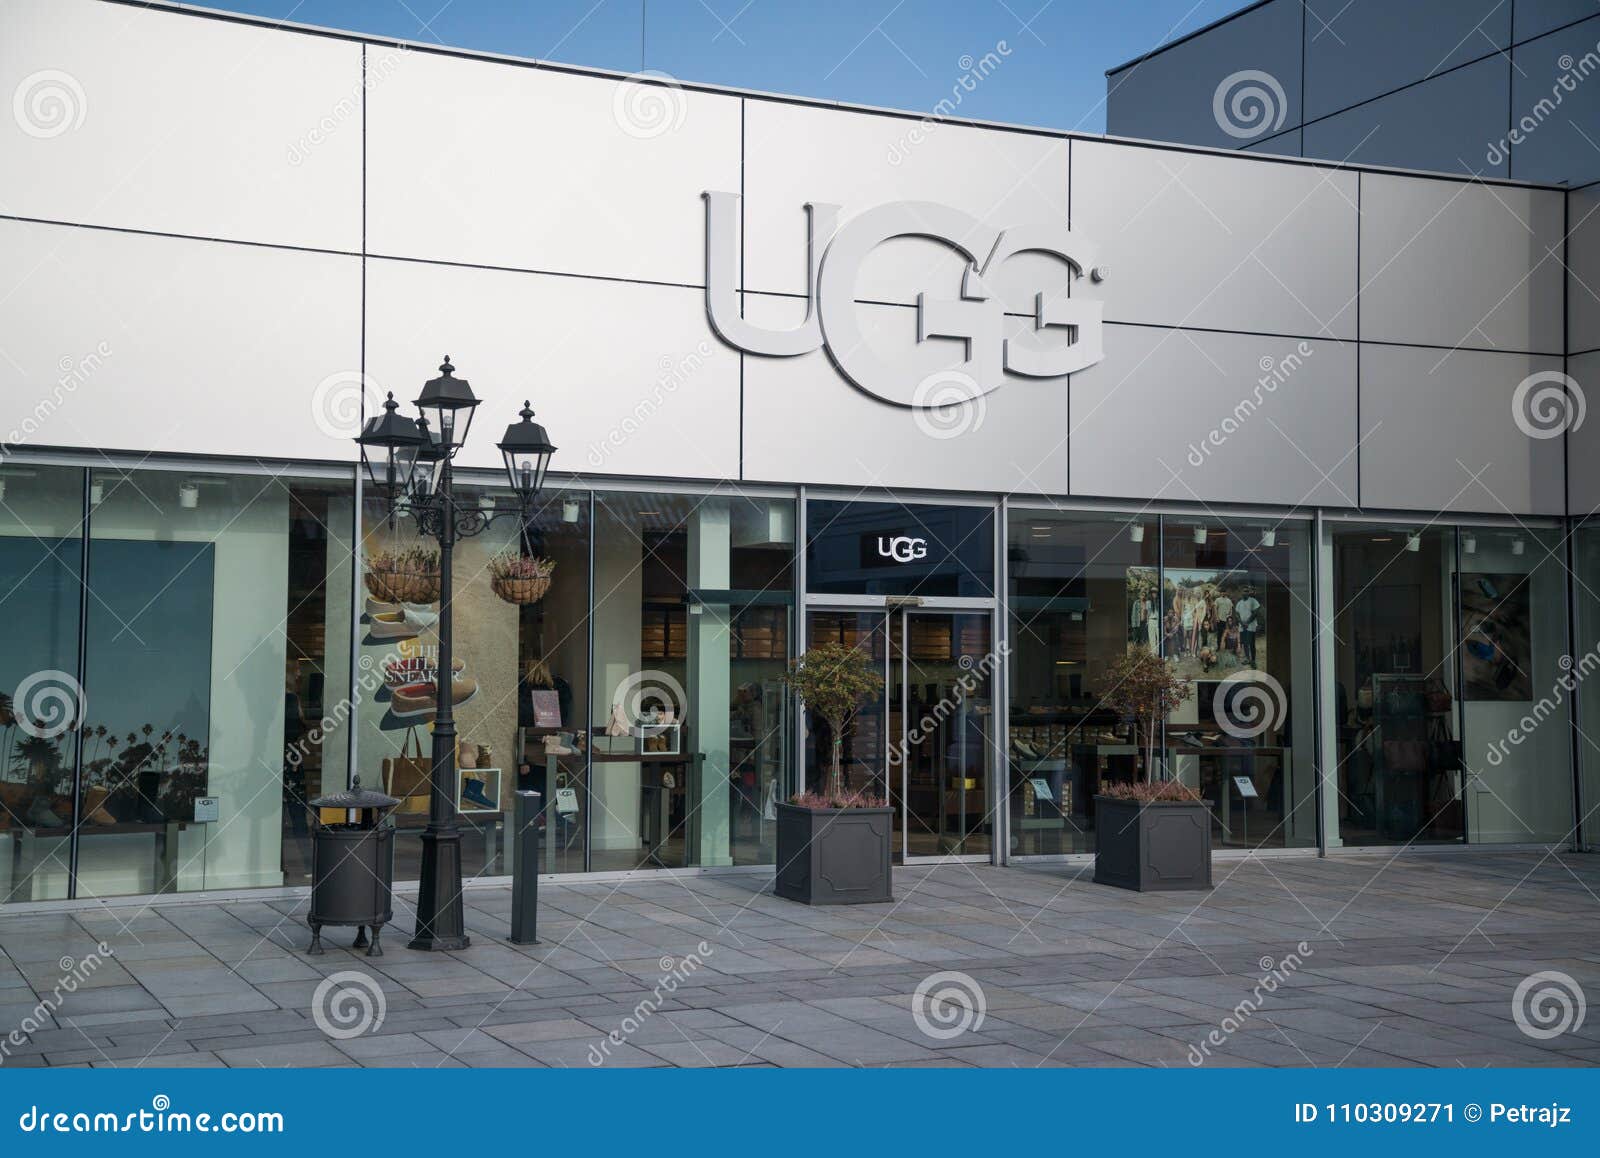 the ugg store